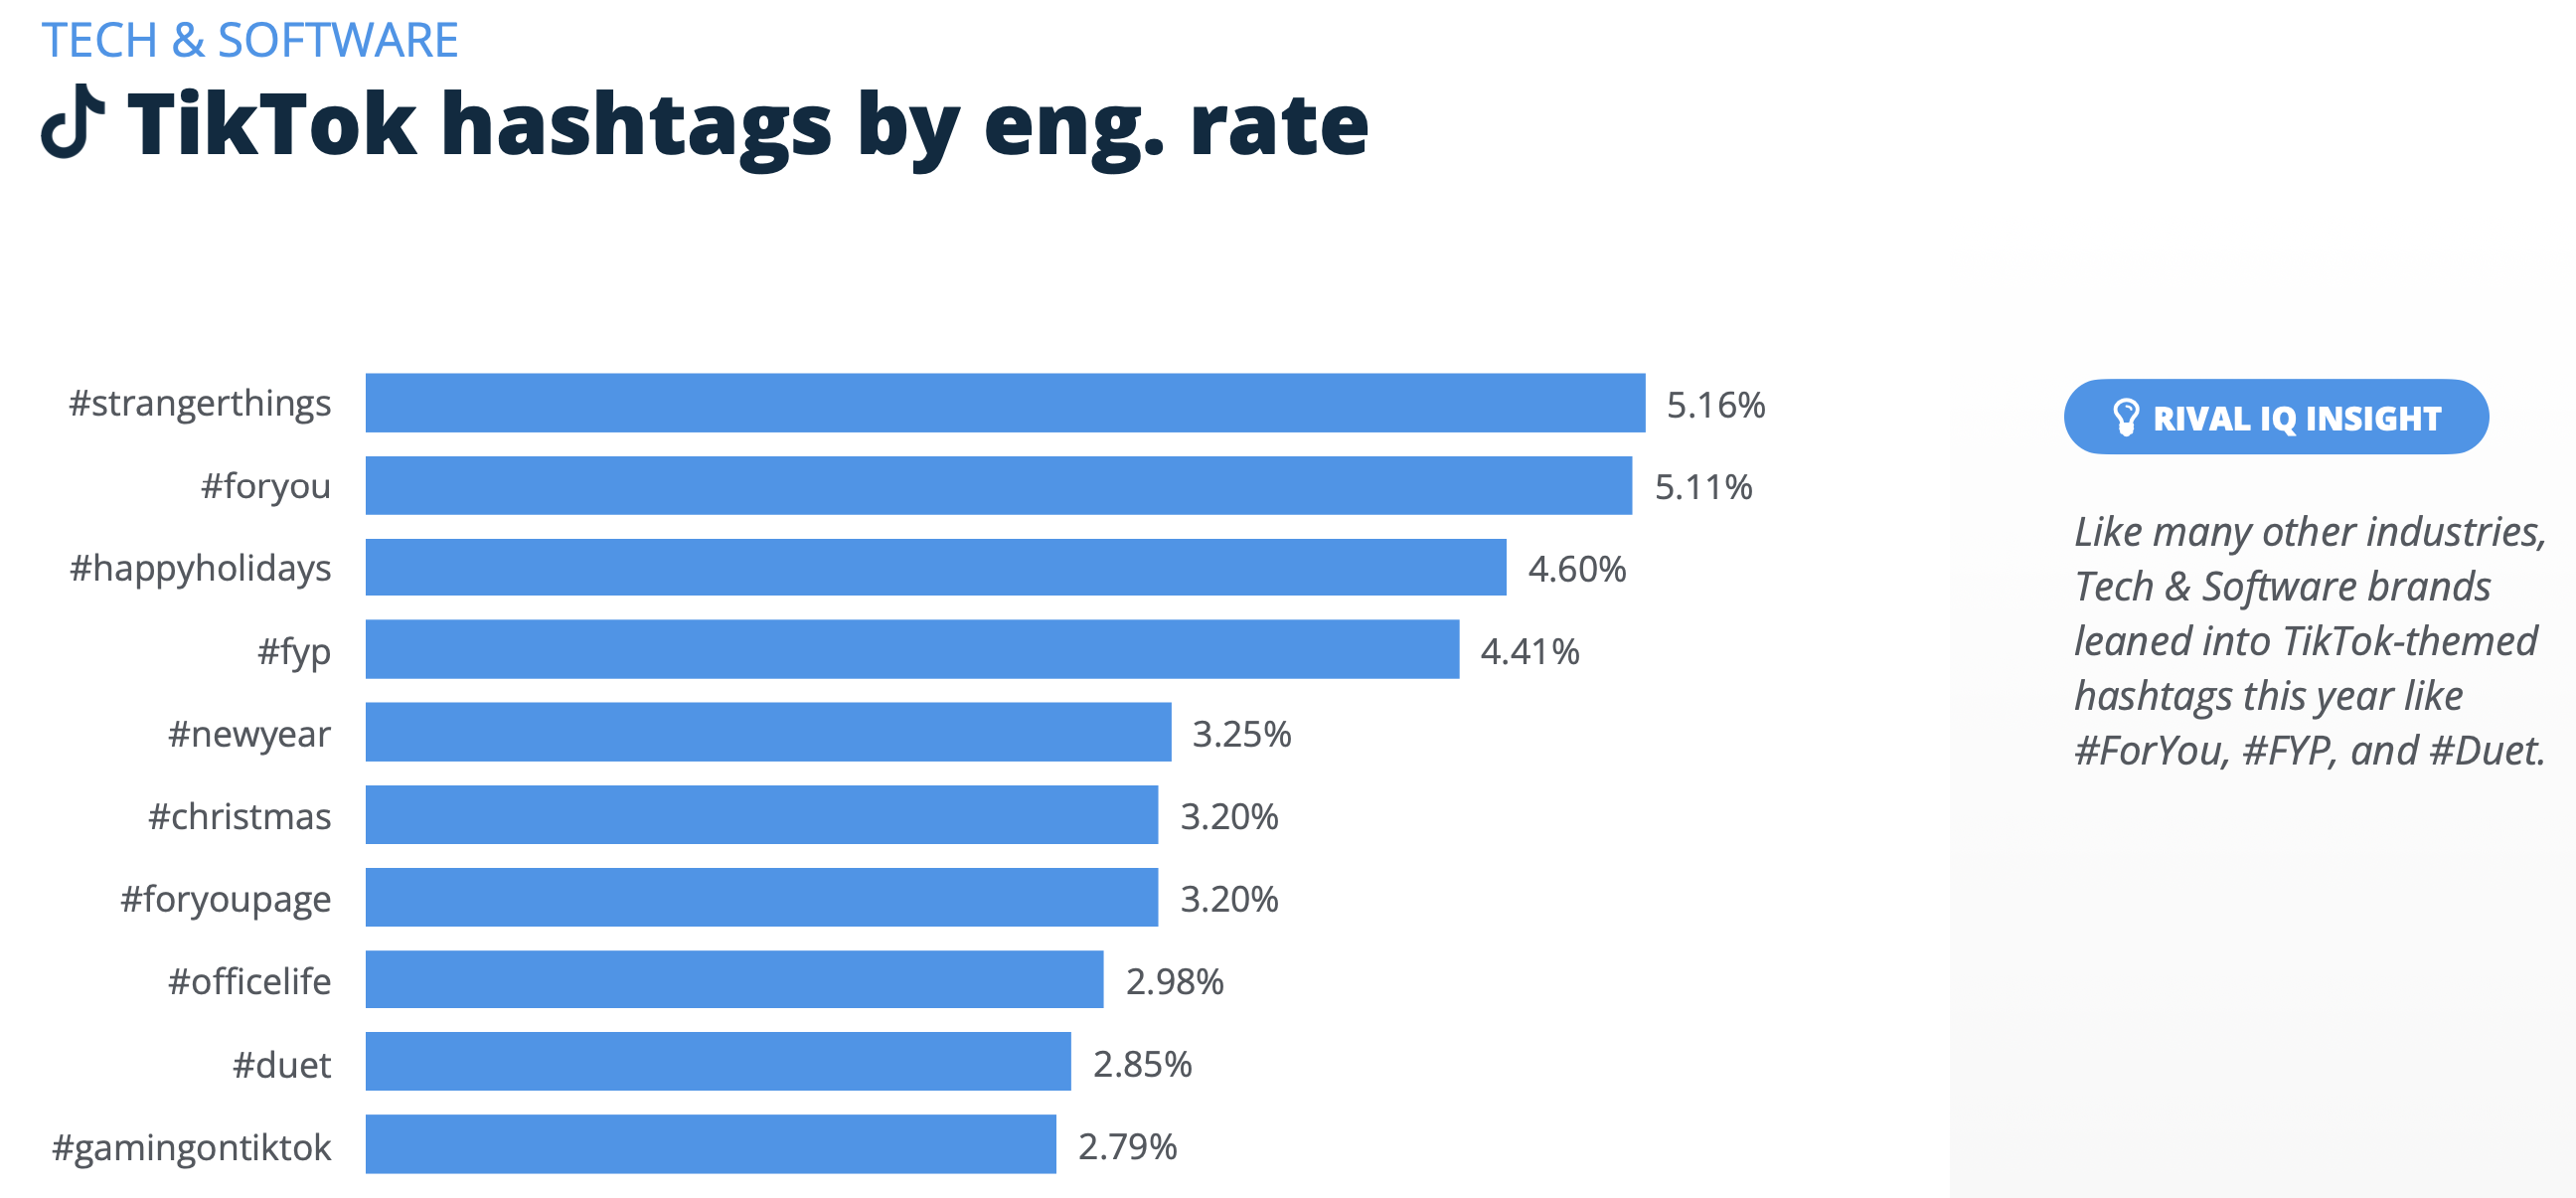 Social media engagement rates are dropping across the top networks